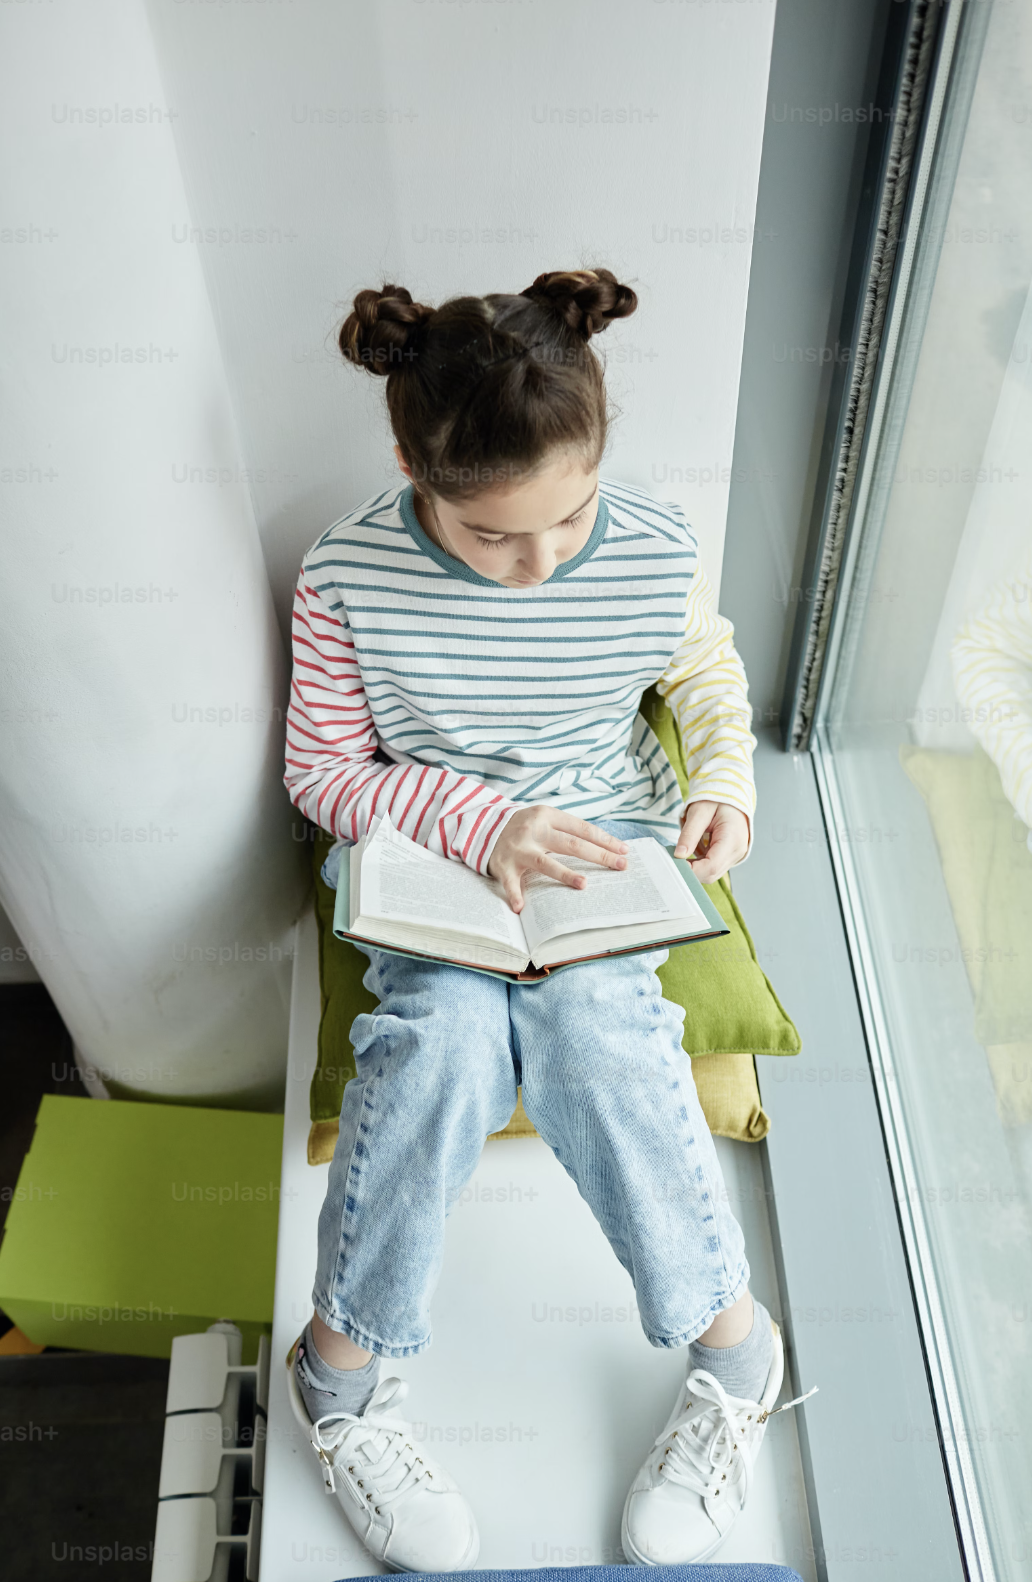 young girl reading a book